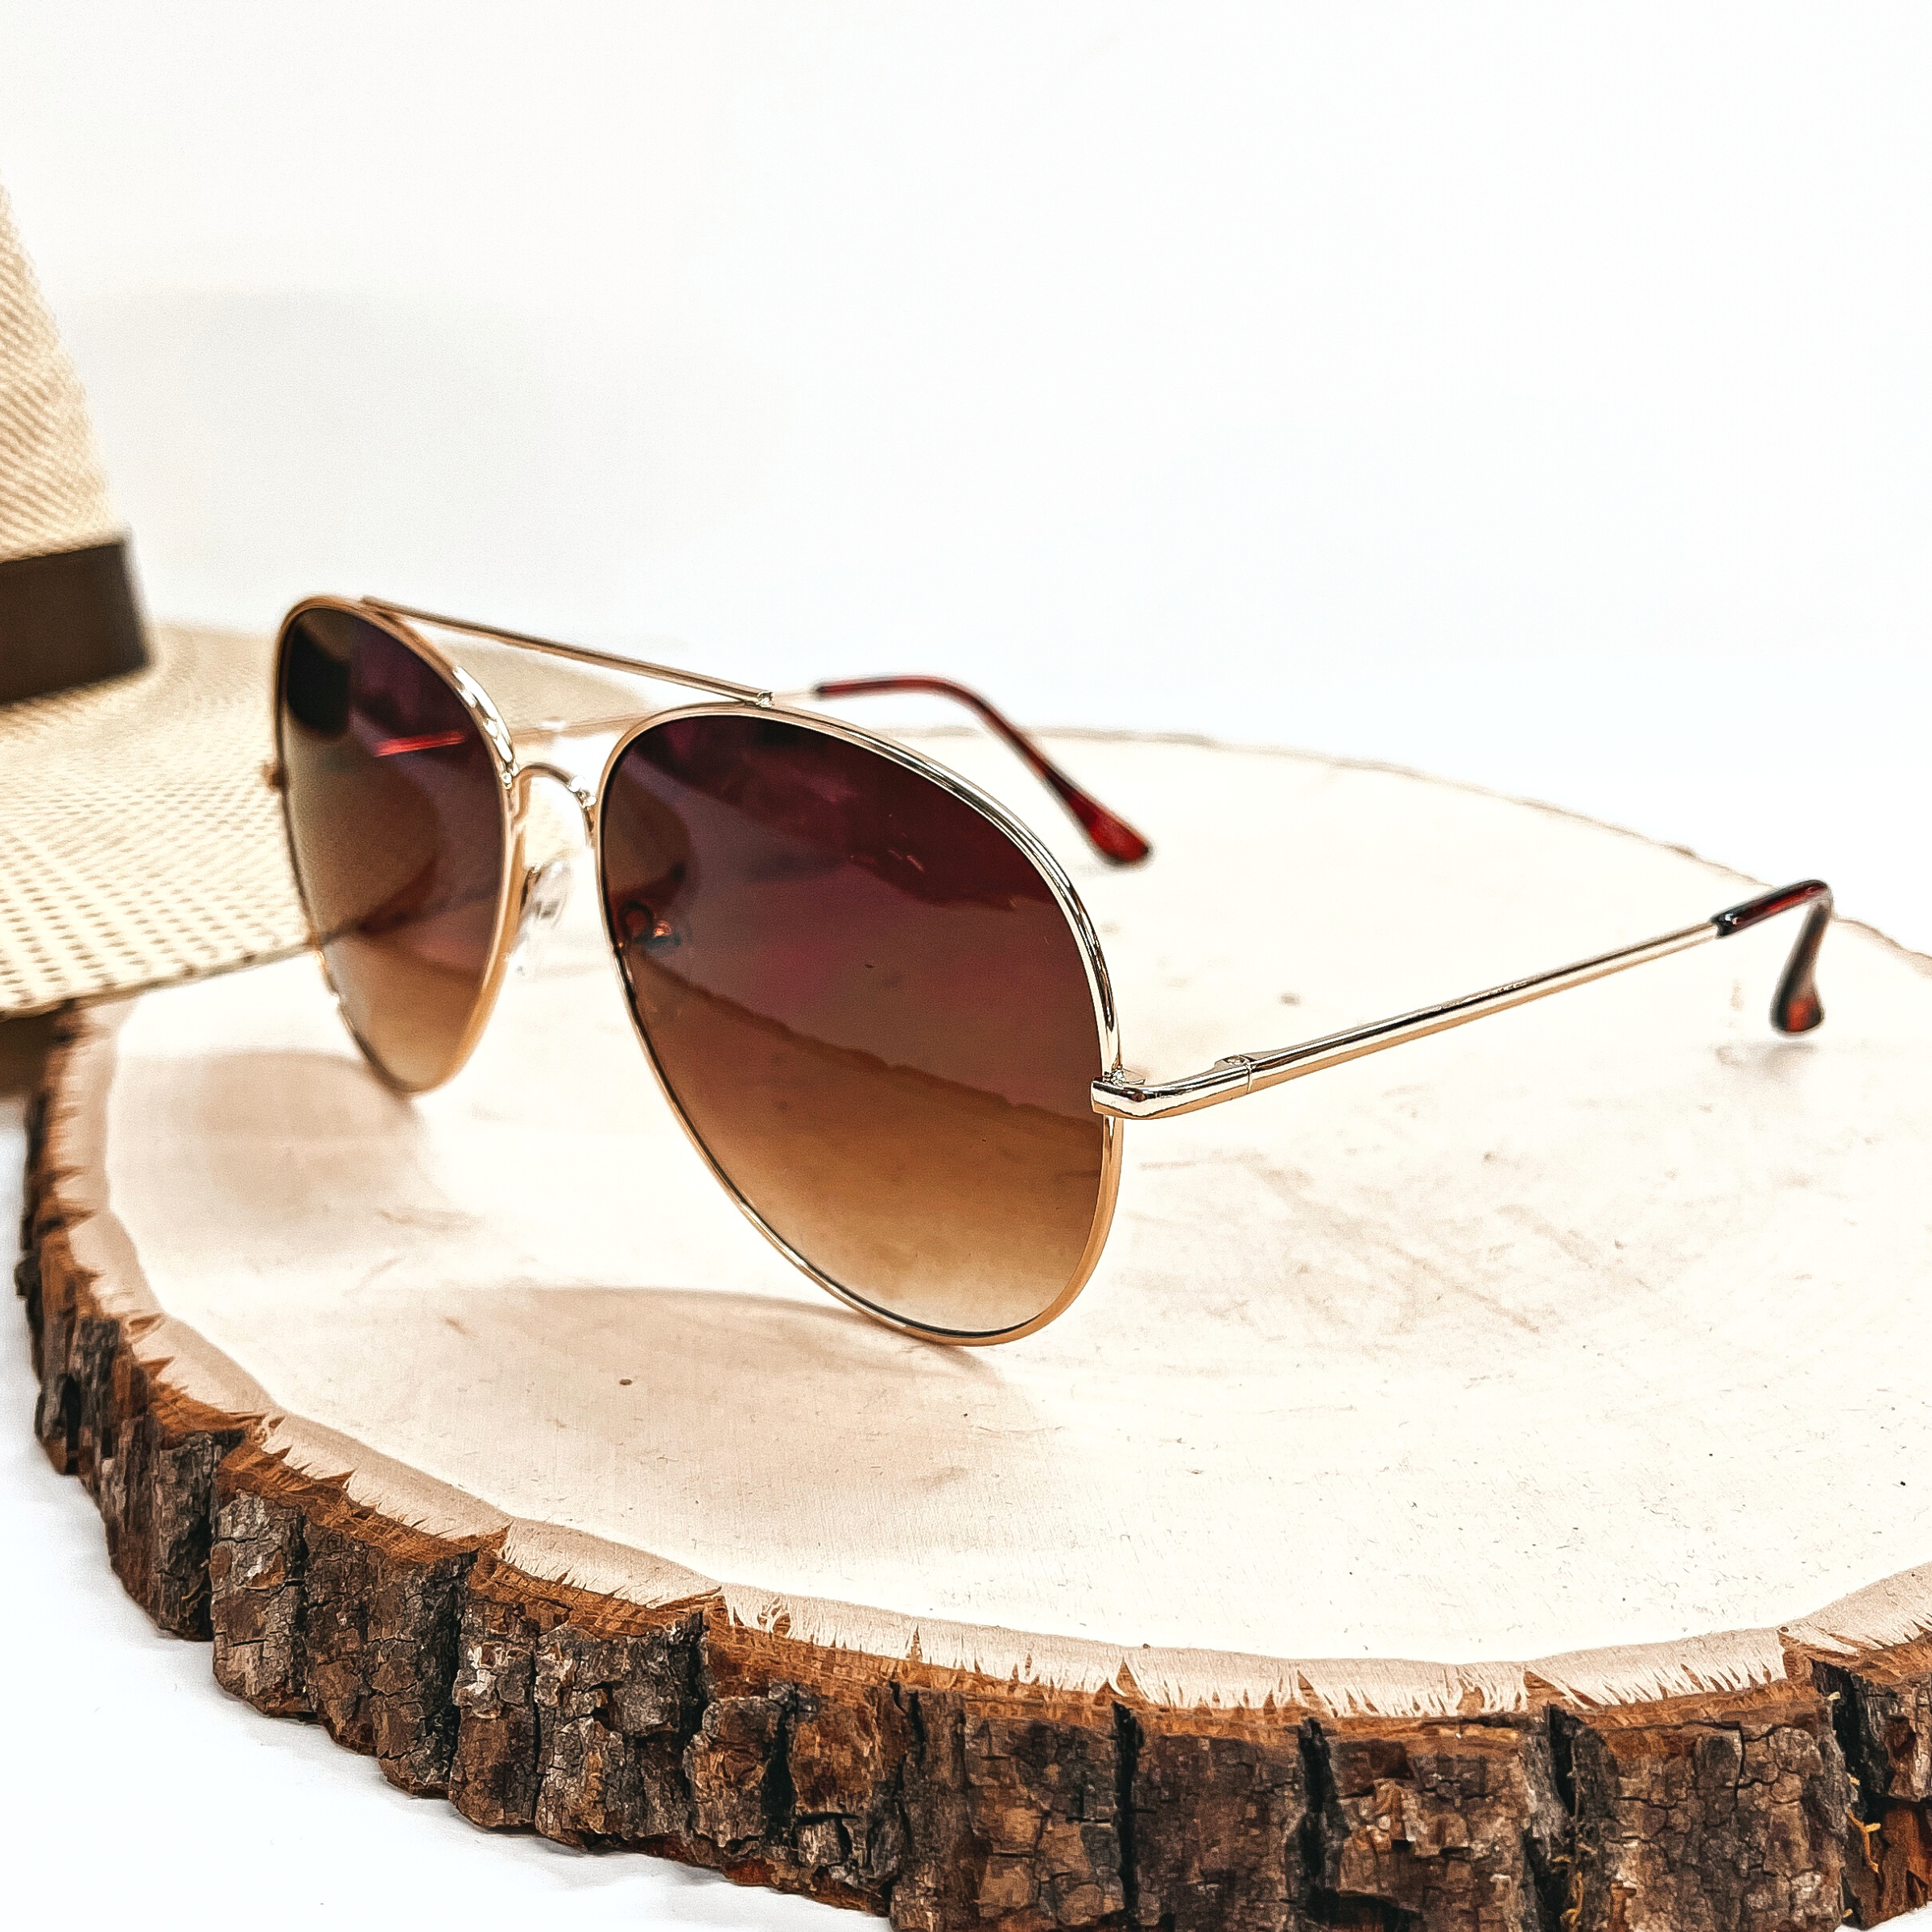 These are aviator style sunglasses with a brown lense and a gold  outline/frame. These sunglasses are taken on top of a slab of wood with a  straw hat in the back as decor.